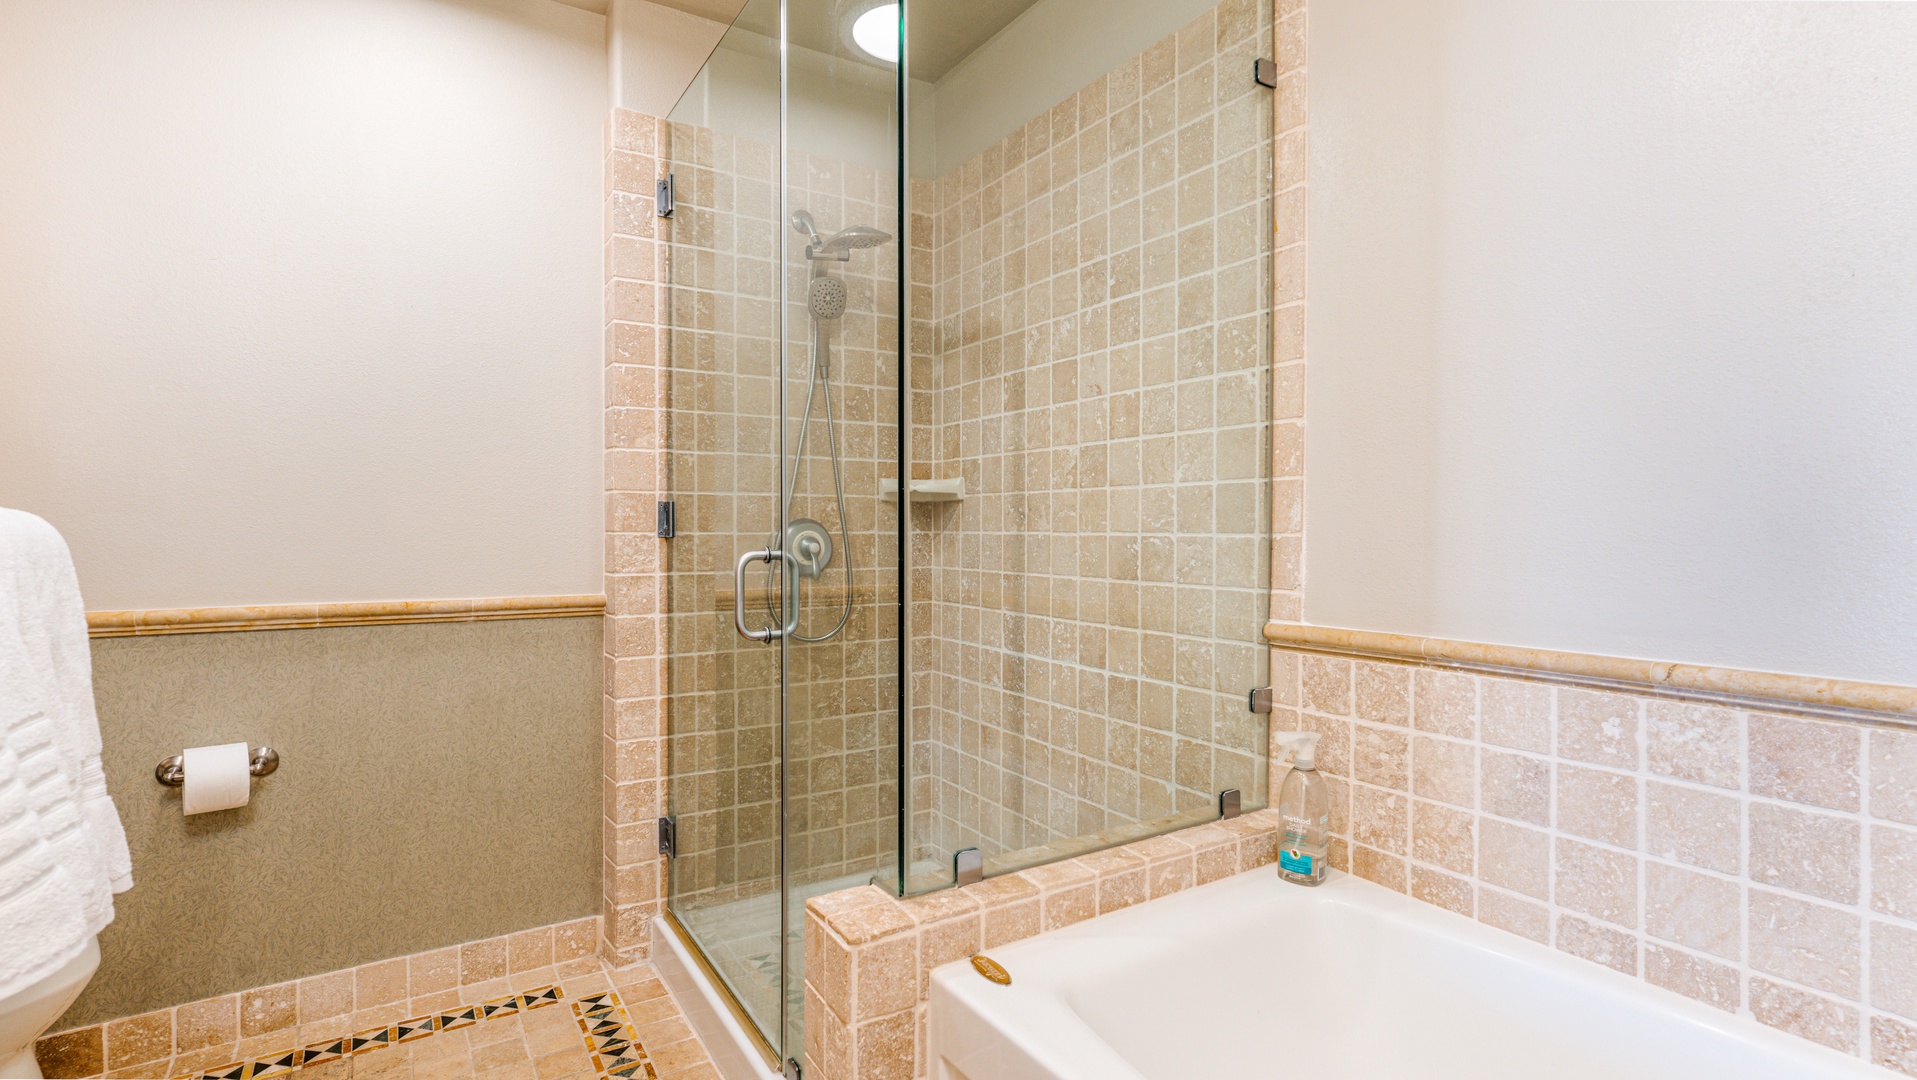 Kapolei Vacation Rentals, Kai Lani 24B - The primary guest bathroom with a shower and soaking tub.